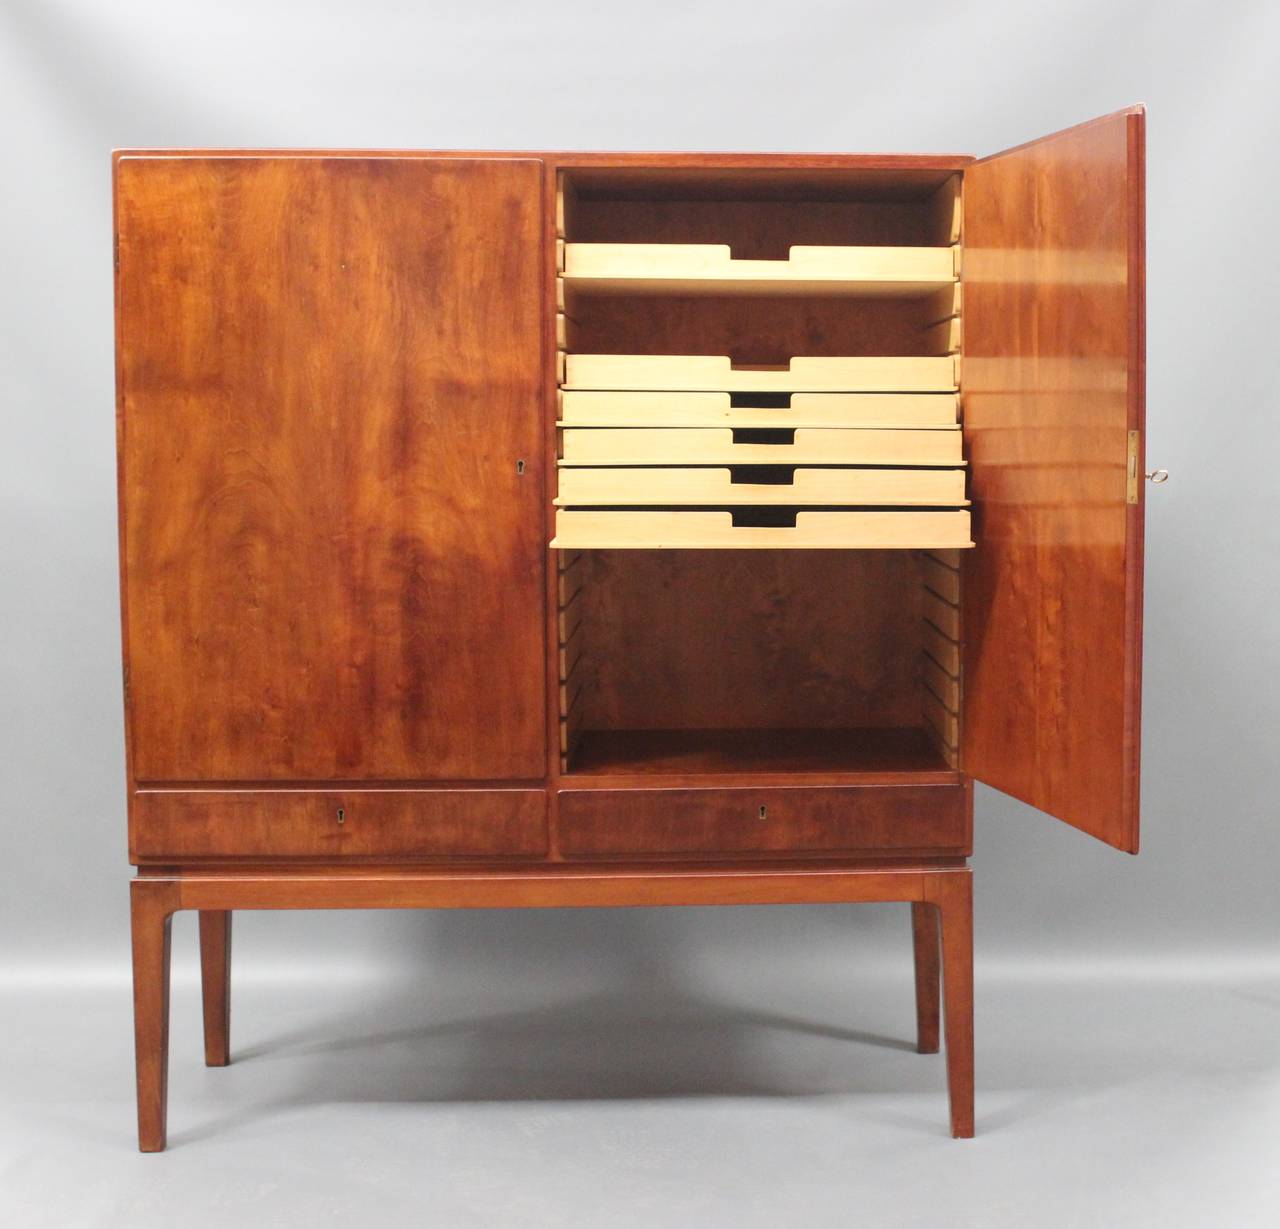 Sideboard, model 1761, designed by Ole Wanscher and manufactured by Fritz Hansen in 1943. The sideboard is in Mahogany, with two drawers, two doors and is in great vintage condition.